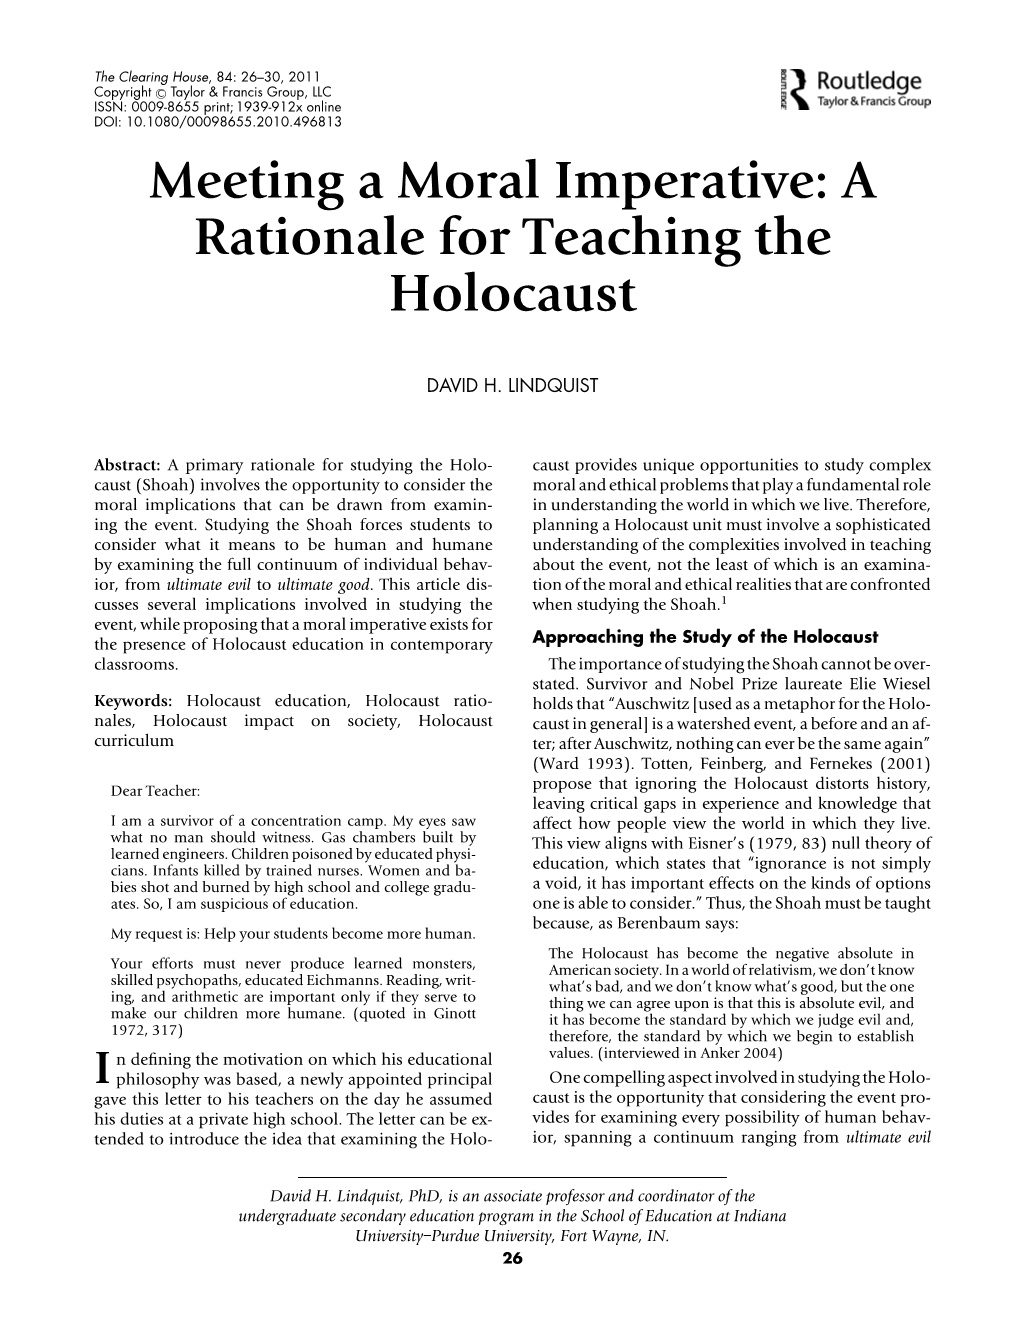 Meeting a Moral Imperative: a Rationale for Teaching the Holocaust